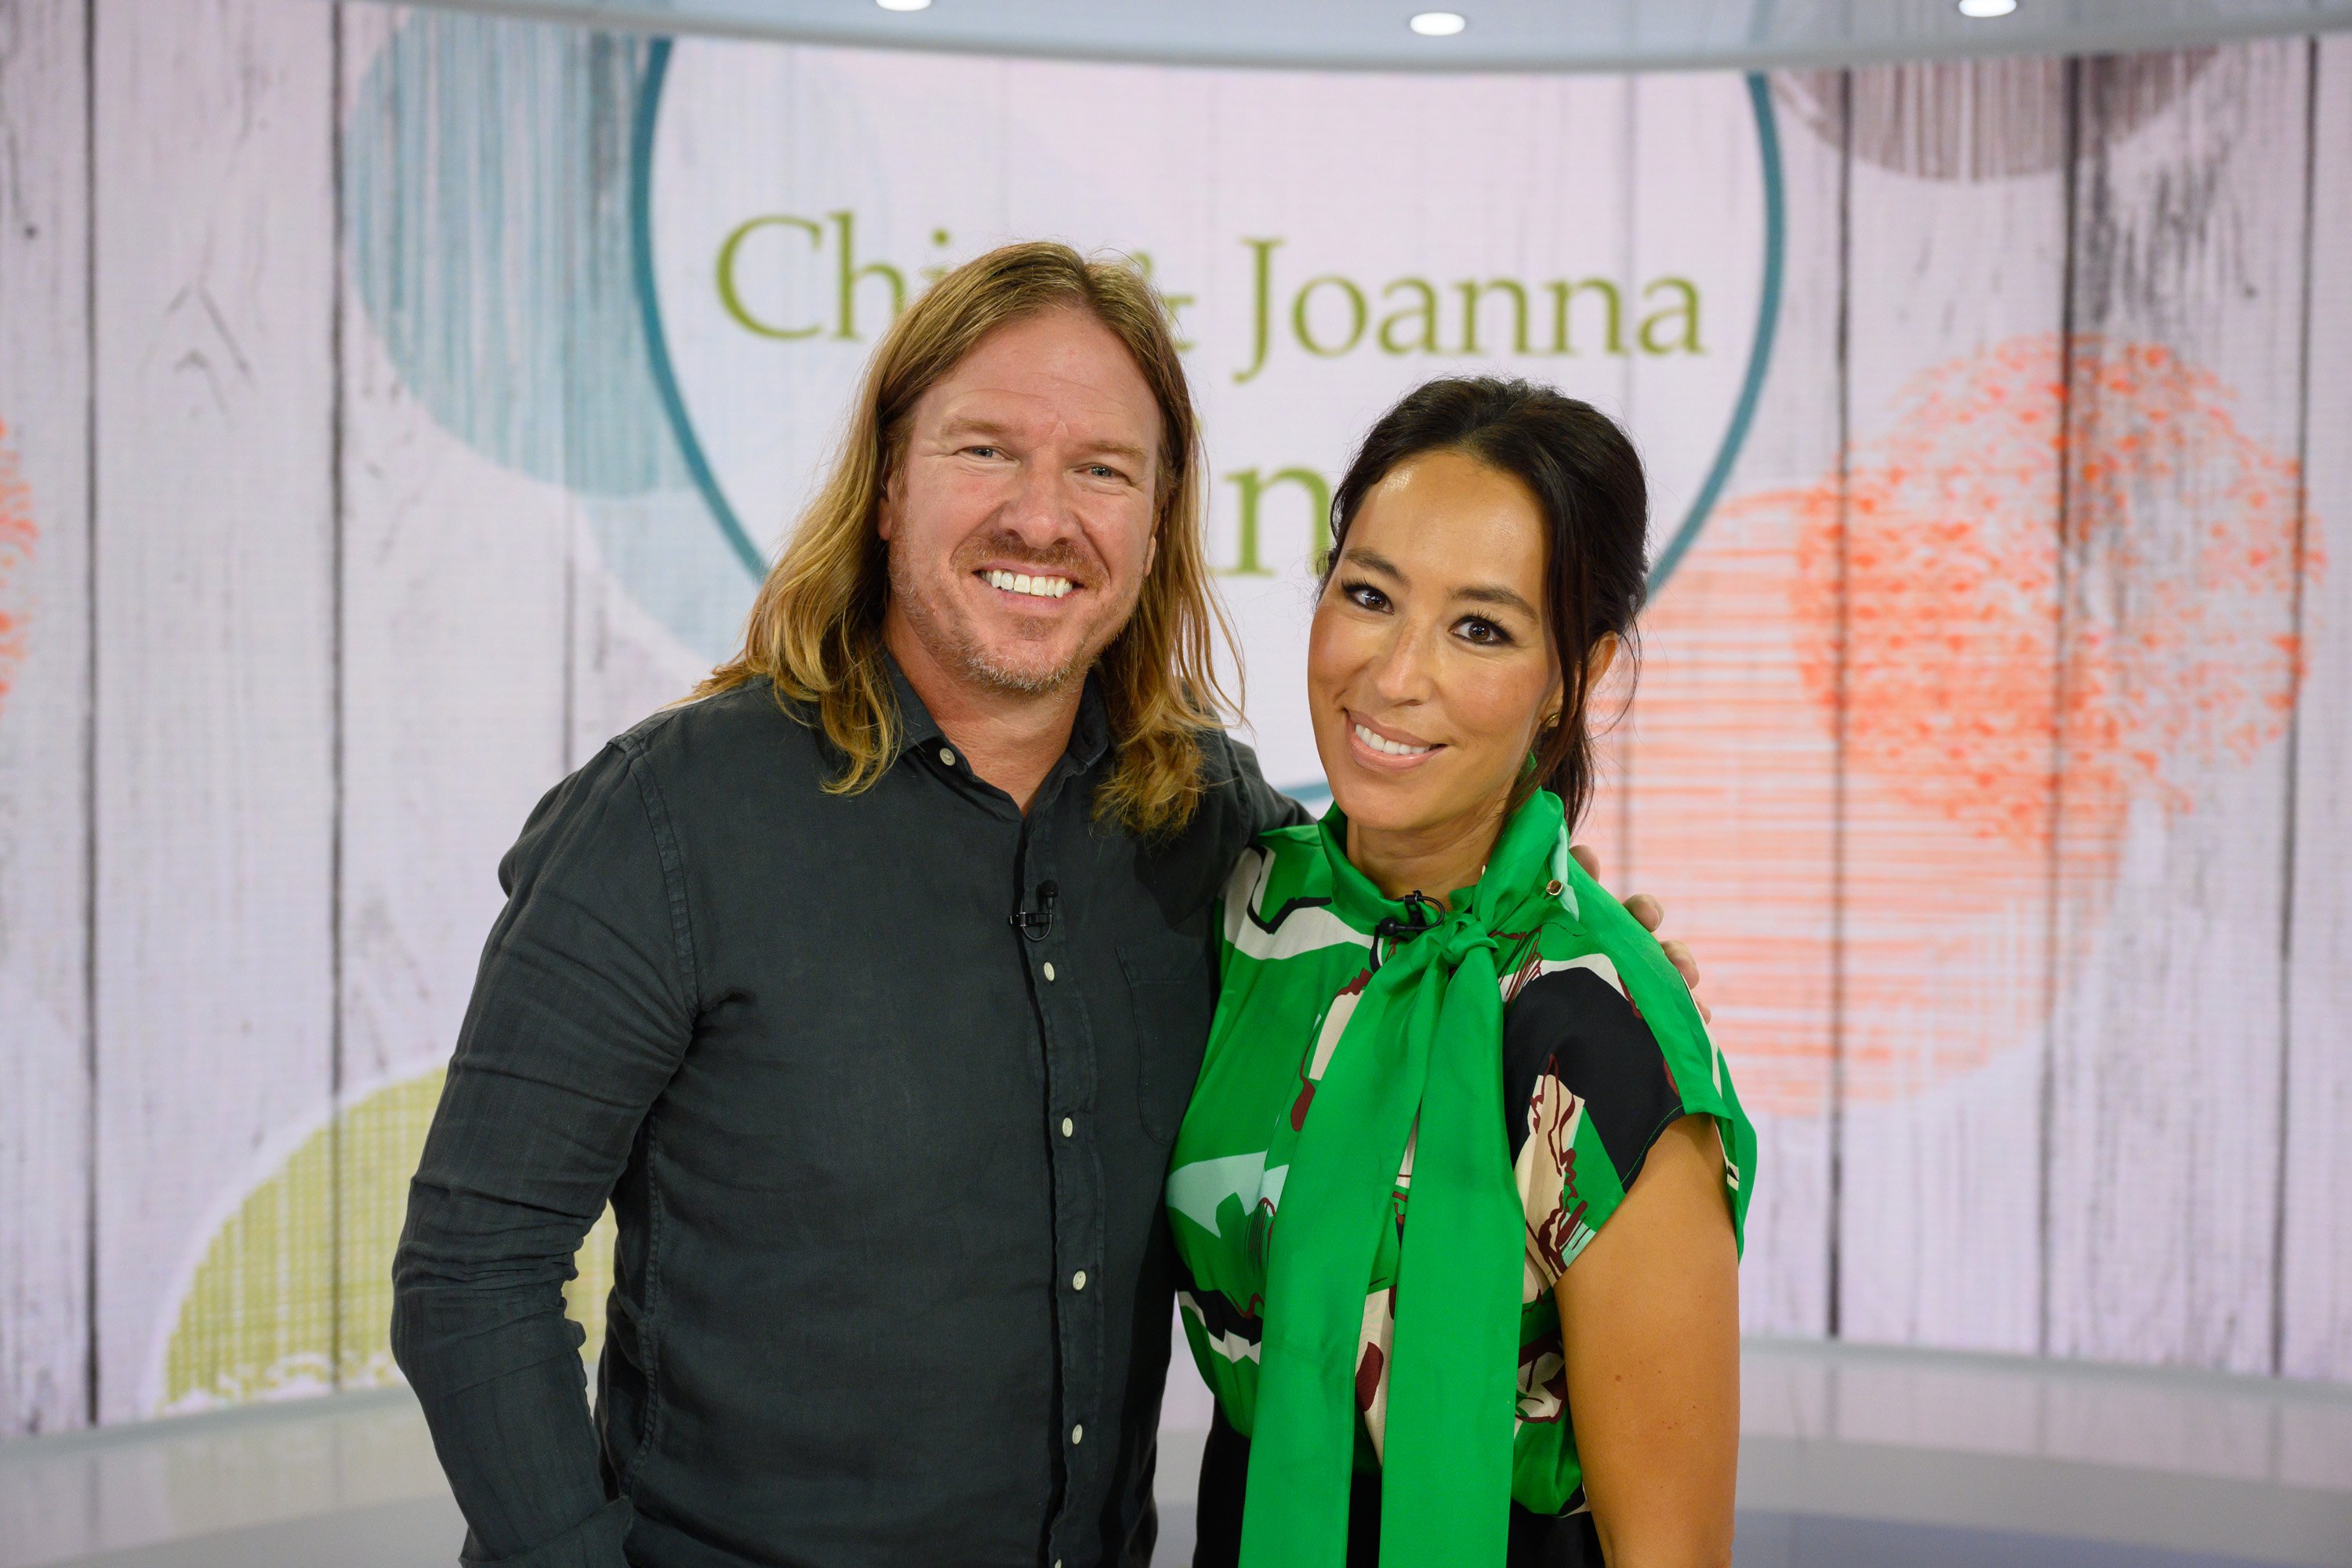 TV presenter Joanna Gaines and her husband Chip Gaines during an appearance at the "Today" show on July 15, 2021. | Source: Getty Images